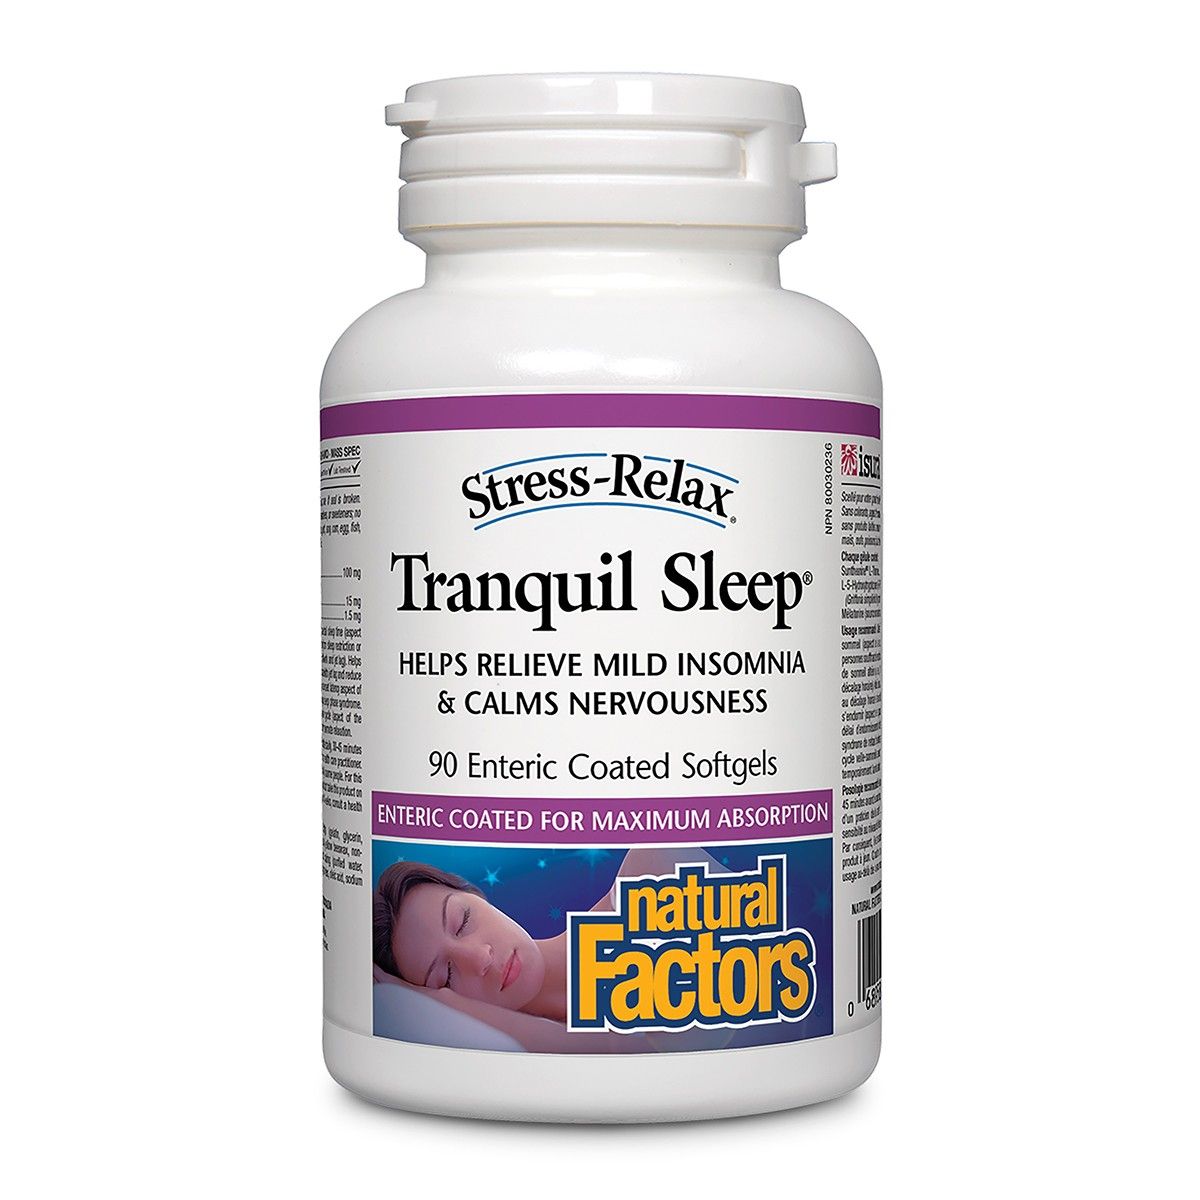 Tranquil Sleep, Stress-Relax® 90 Enteric Coated Softgels